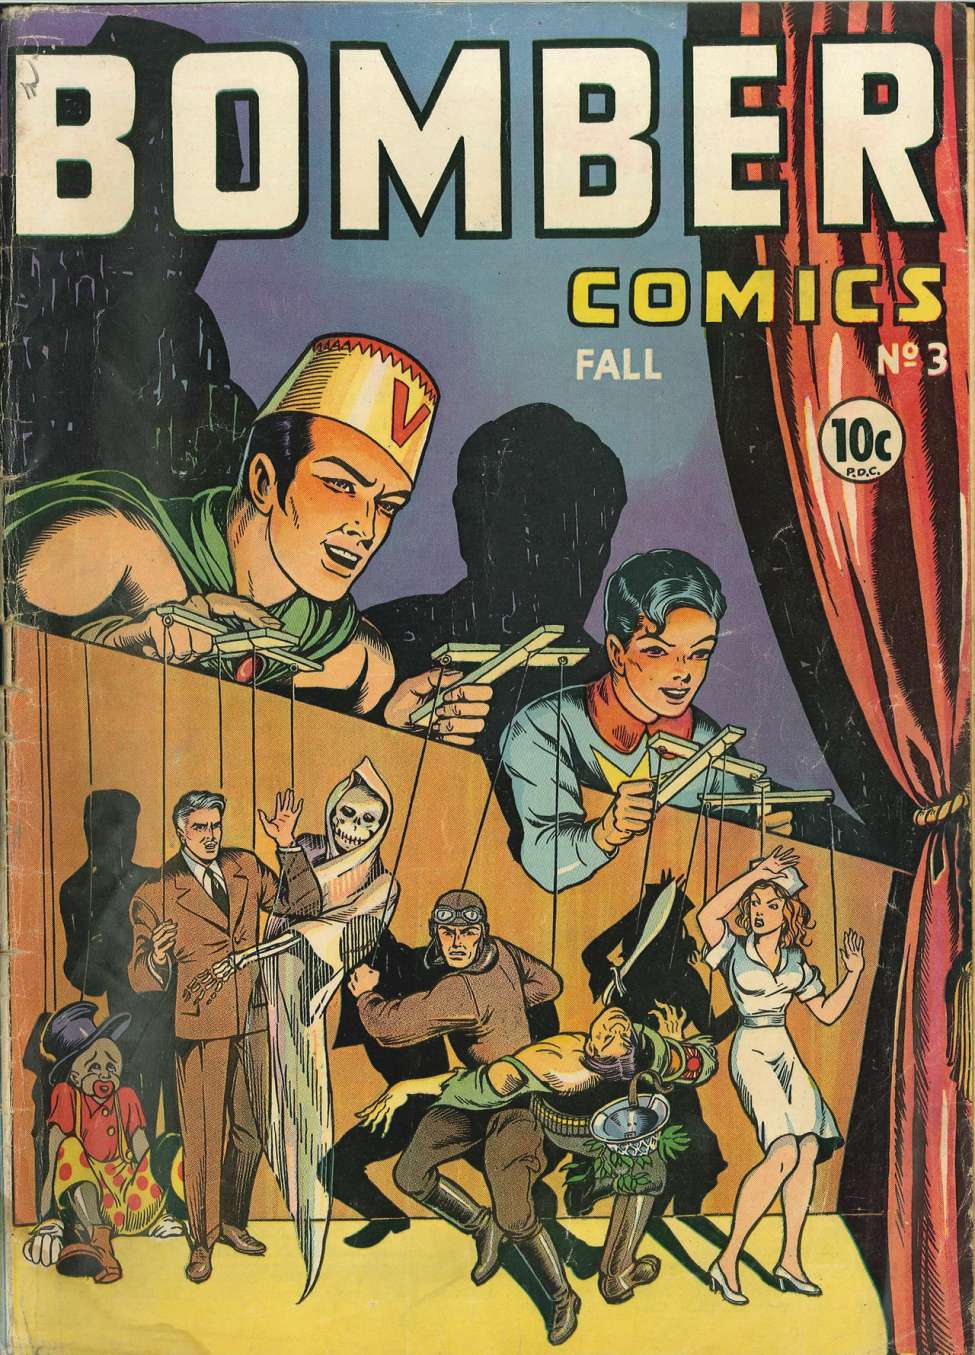 Comic Book Cover For Bomber Comics 3